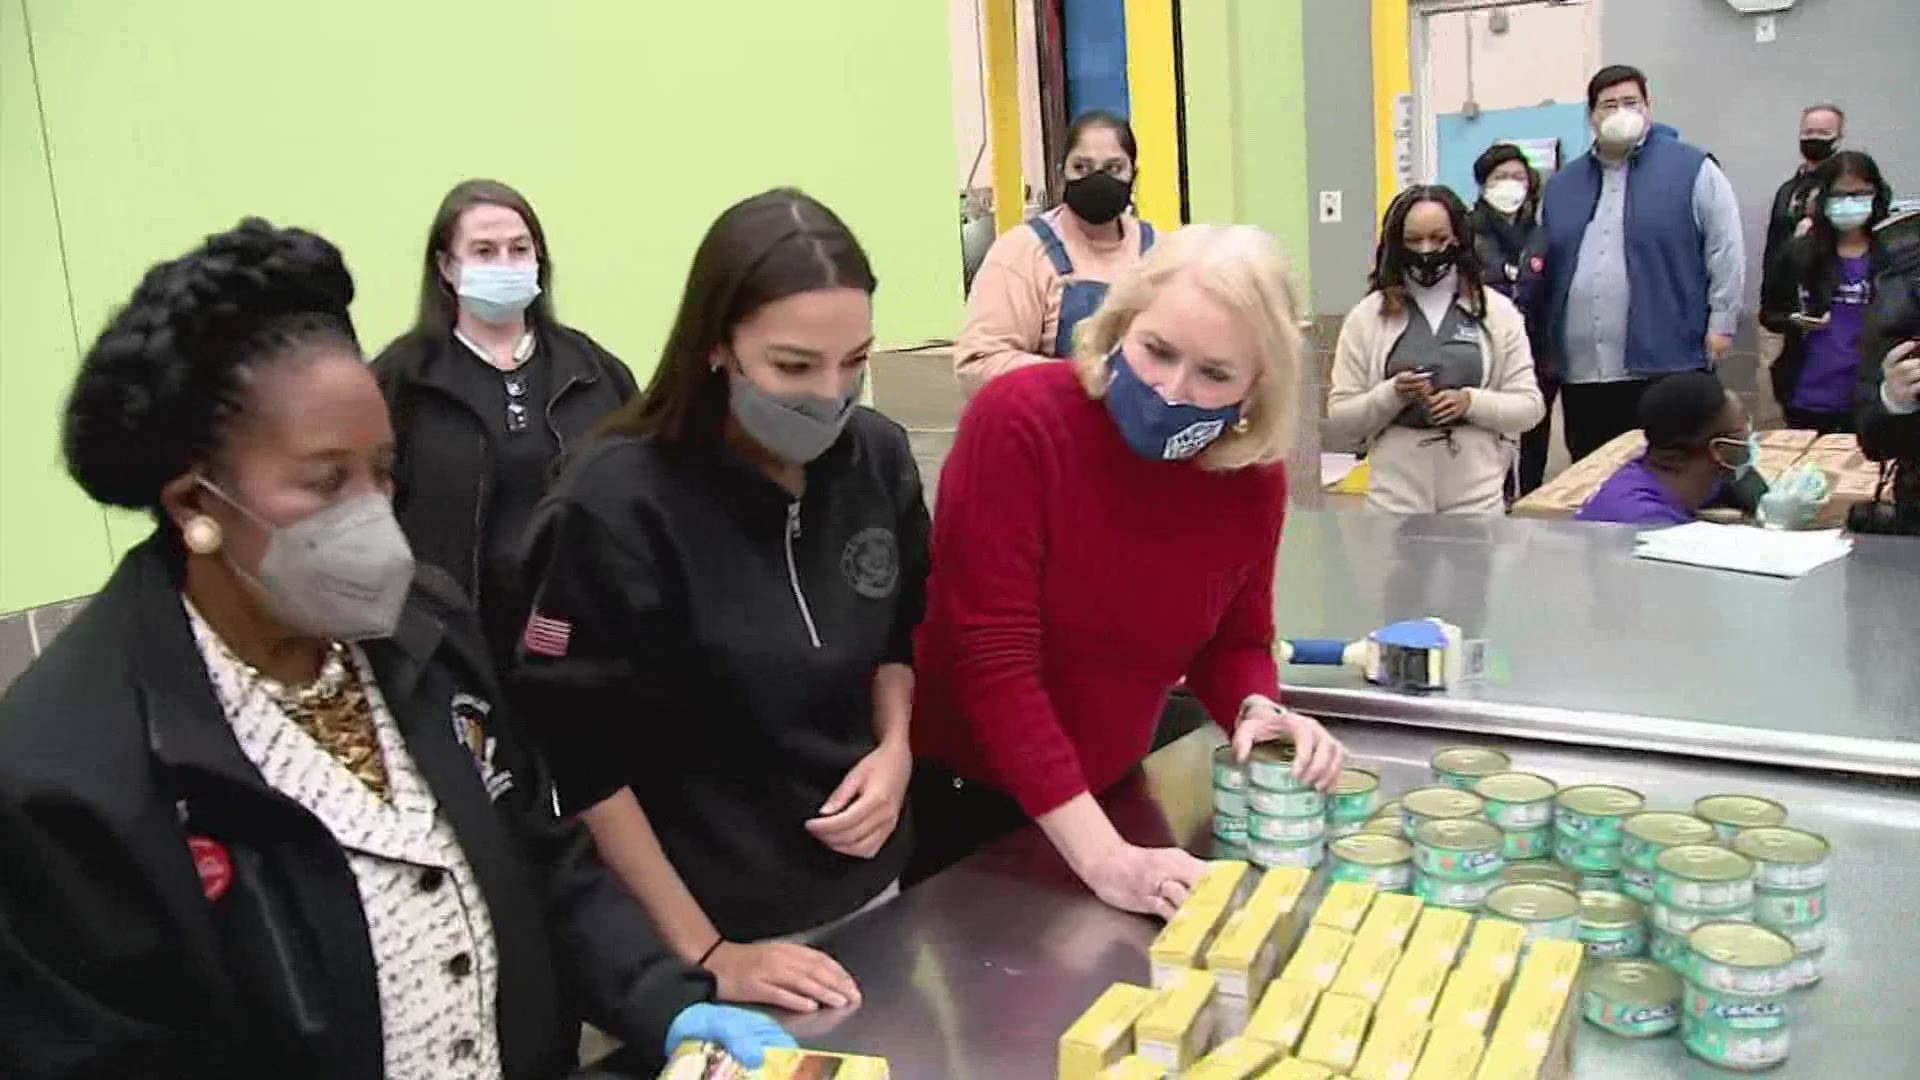 Rep. Alexandria Ocasio-Cortez visited the Houston Food Bank Saturday with Reps. Sylvia Garcia and Sheila Jackson-Lee in the aftermath of the deadly winter storm.